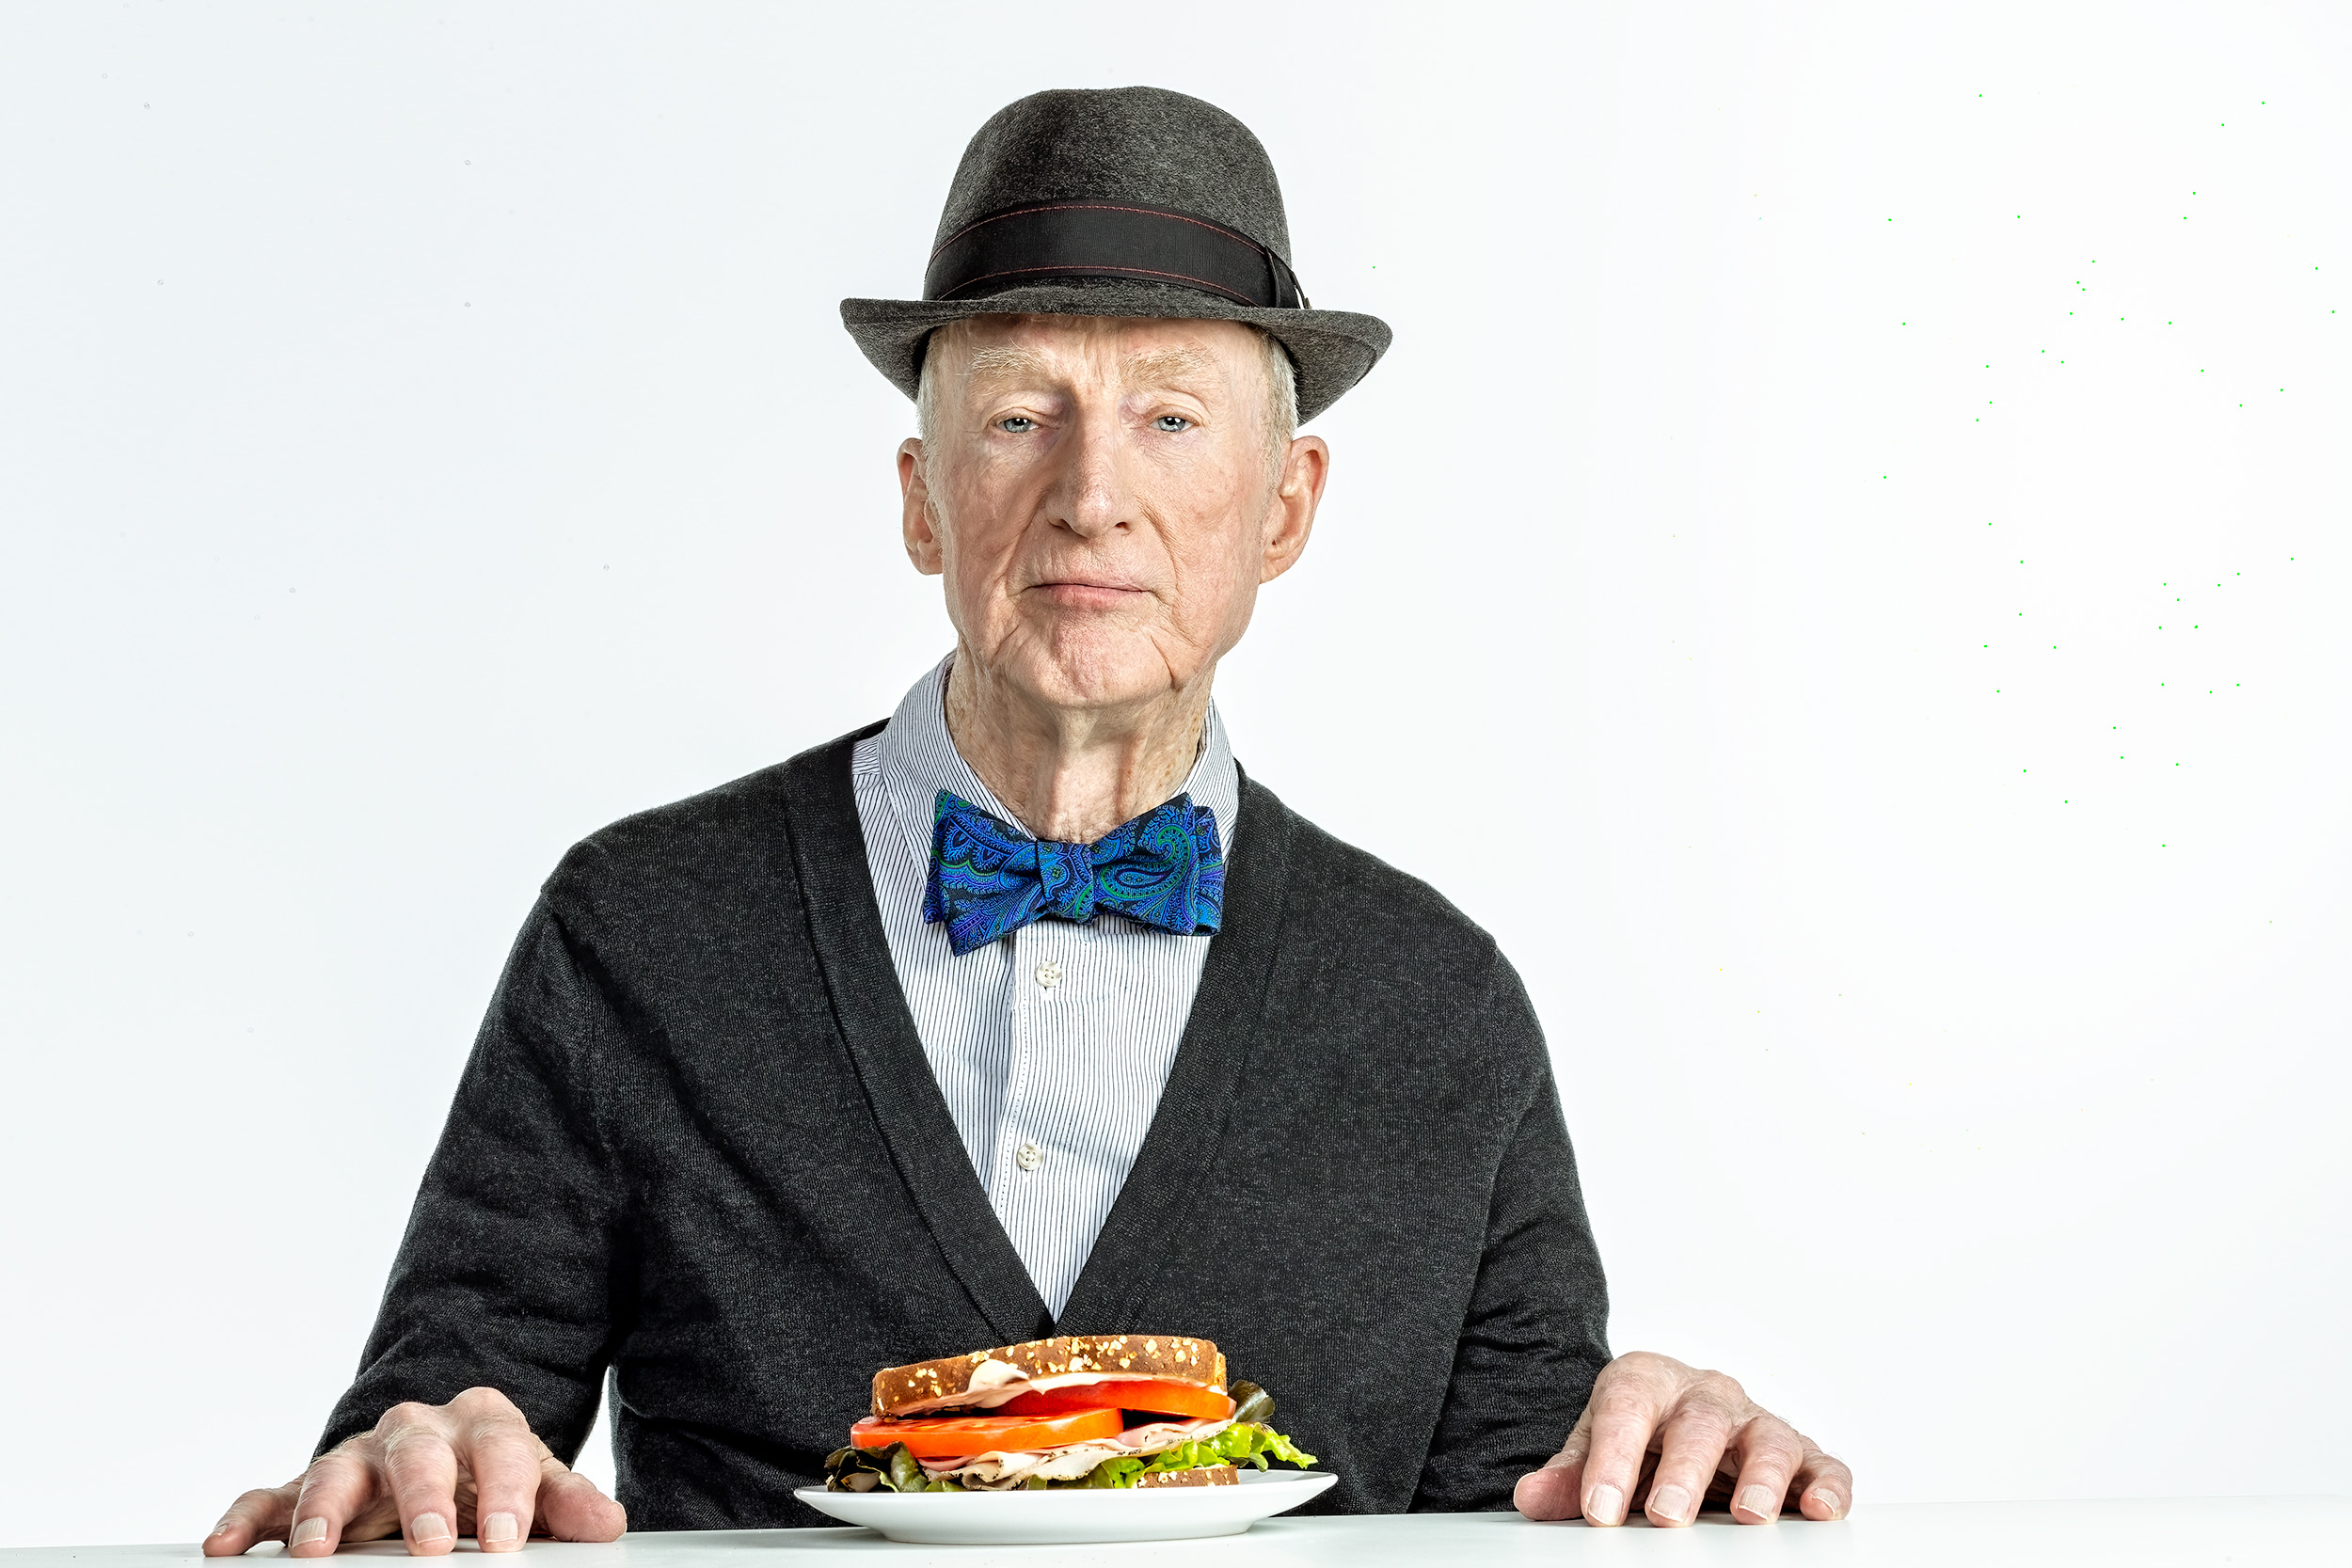 Elder man with bowtie and sweater wearing a hat at a table with a tomato sandwhich Community Table